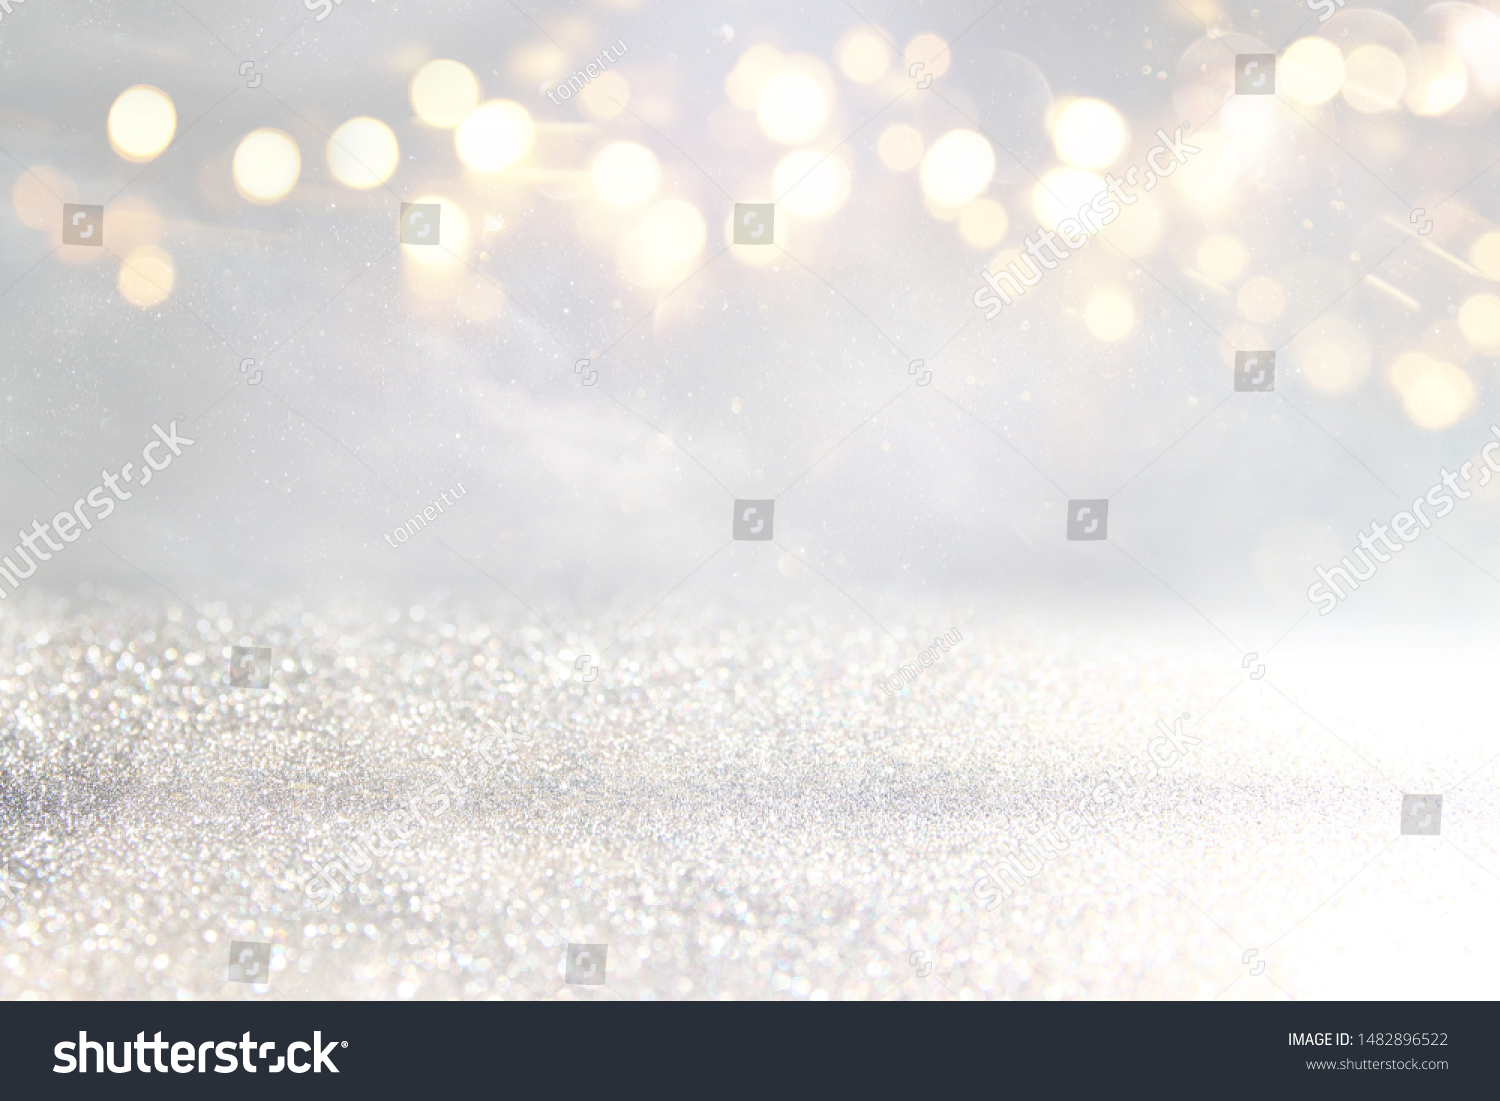 background of abstract glitter lights. silver and gold. de-focused #1482896522